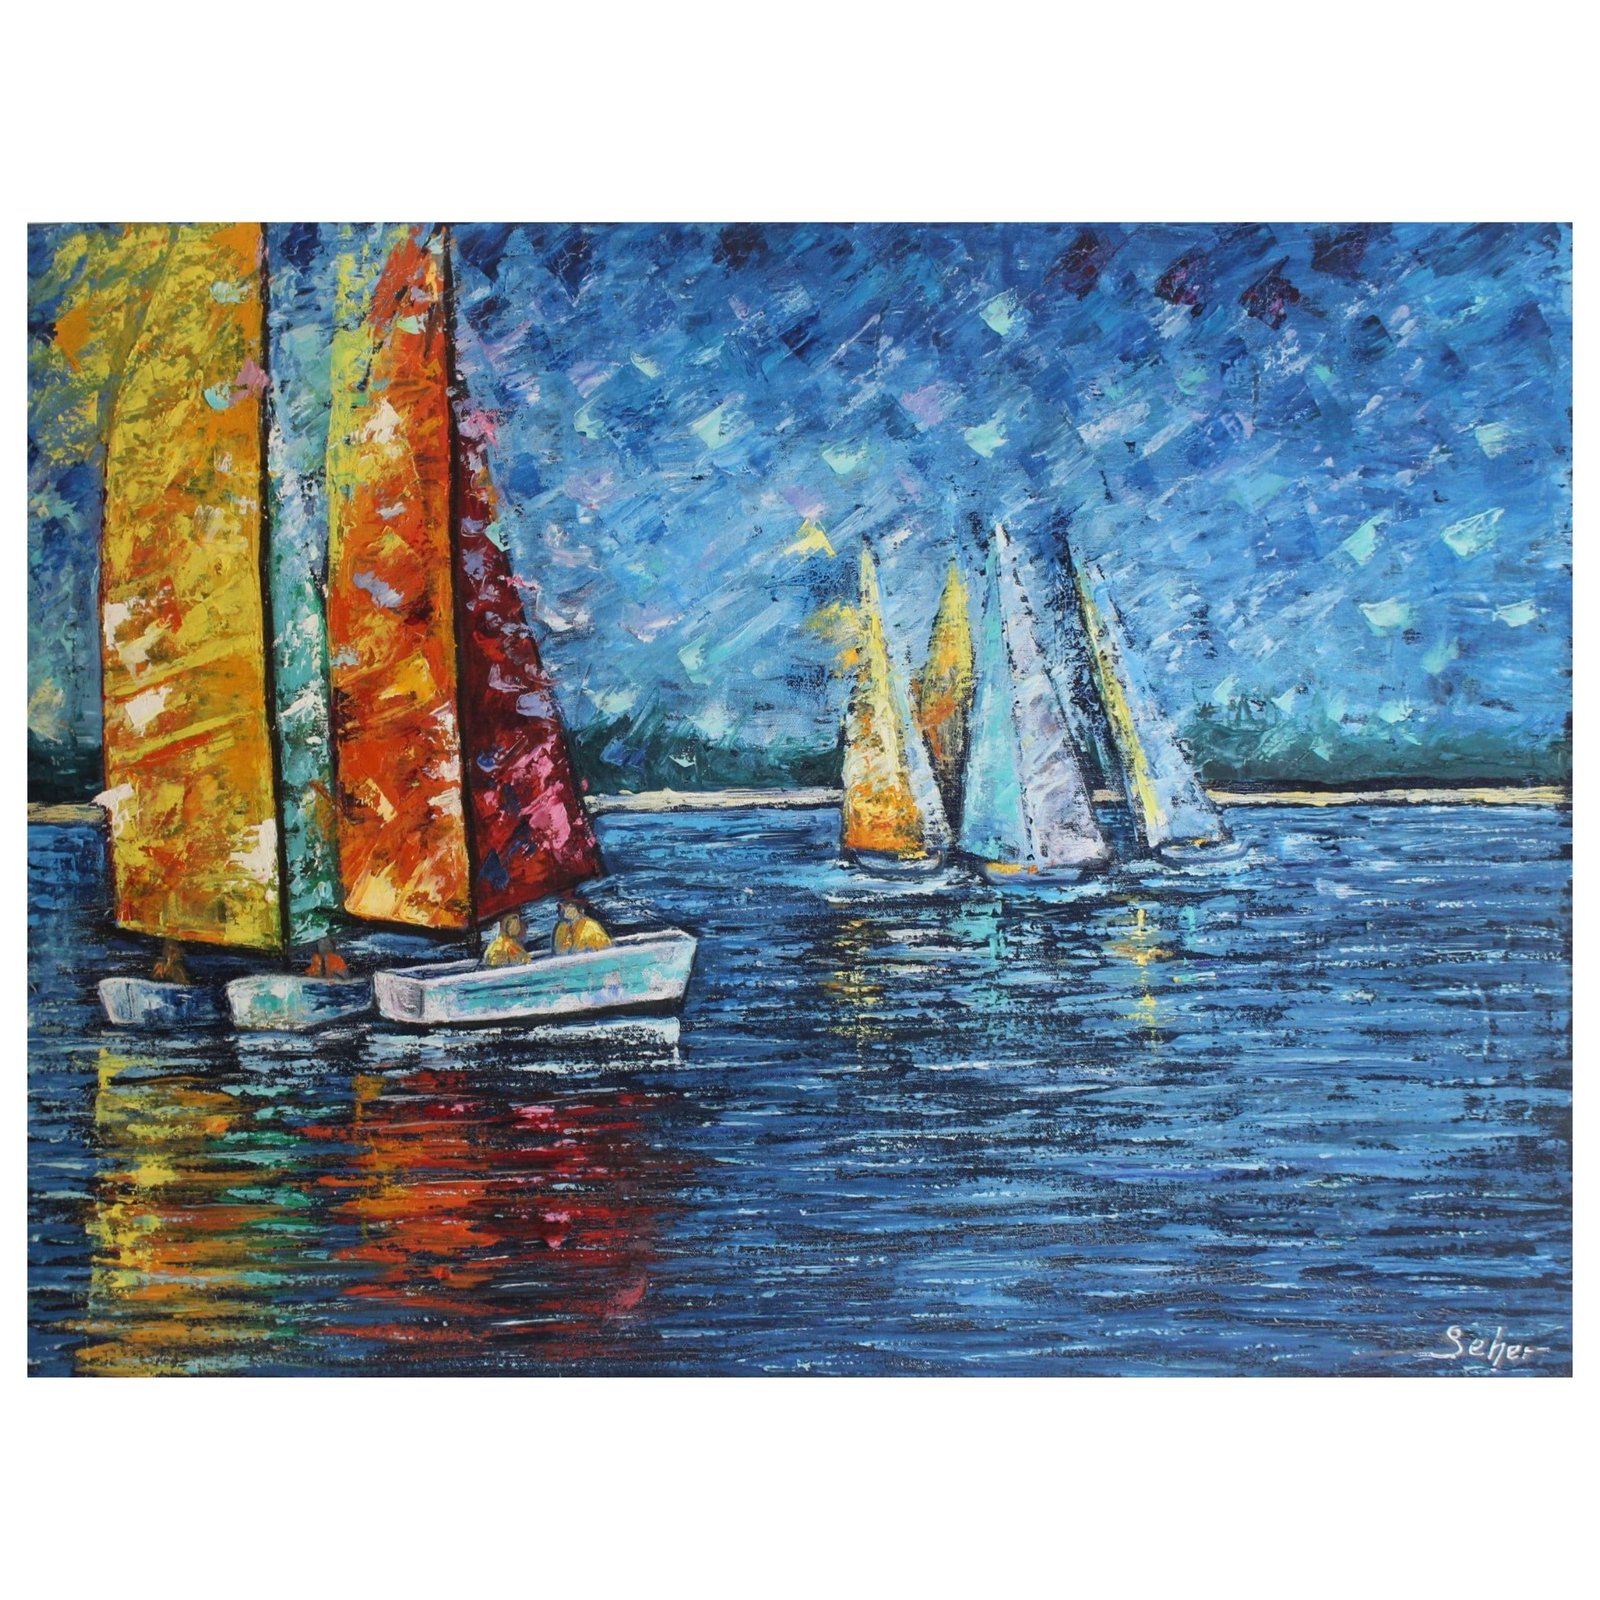 oil painting of a sea and boats on it with bold brush and pallet knife strokes